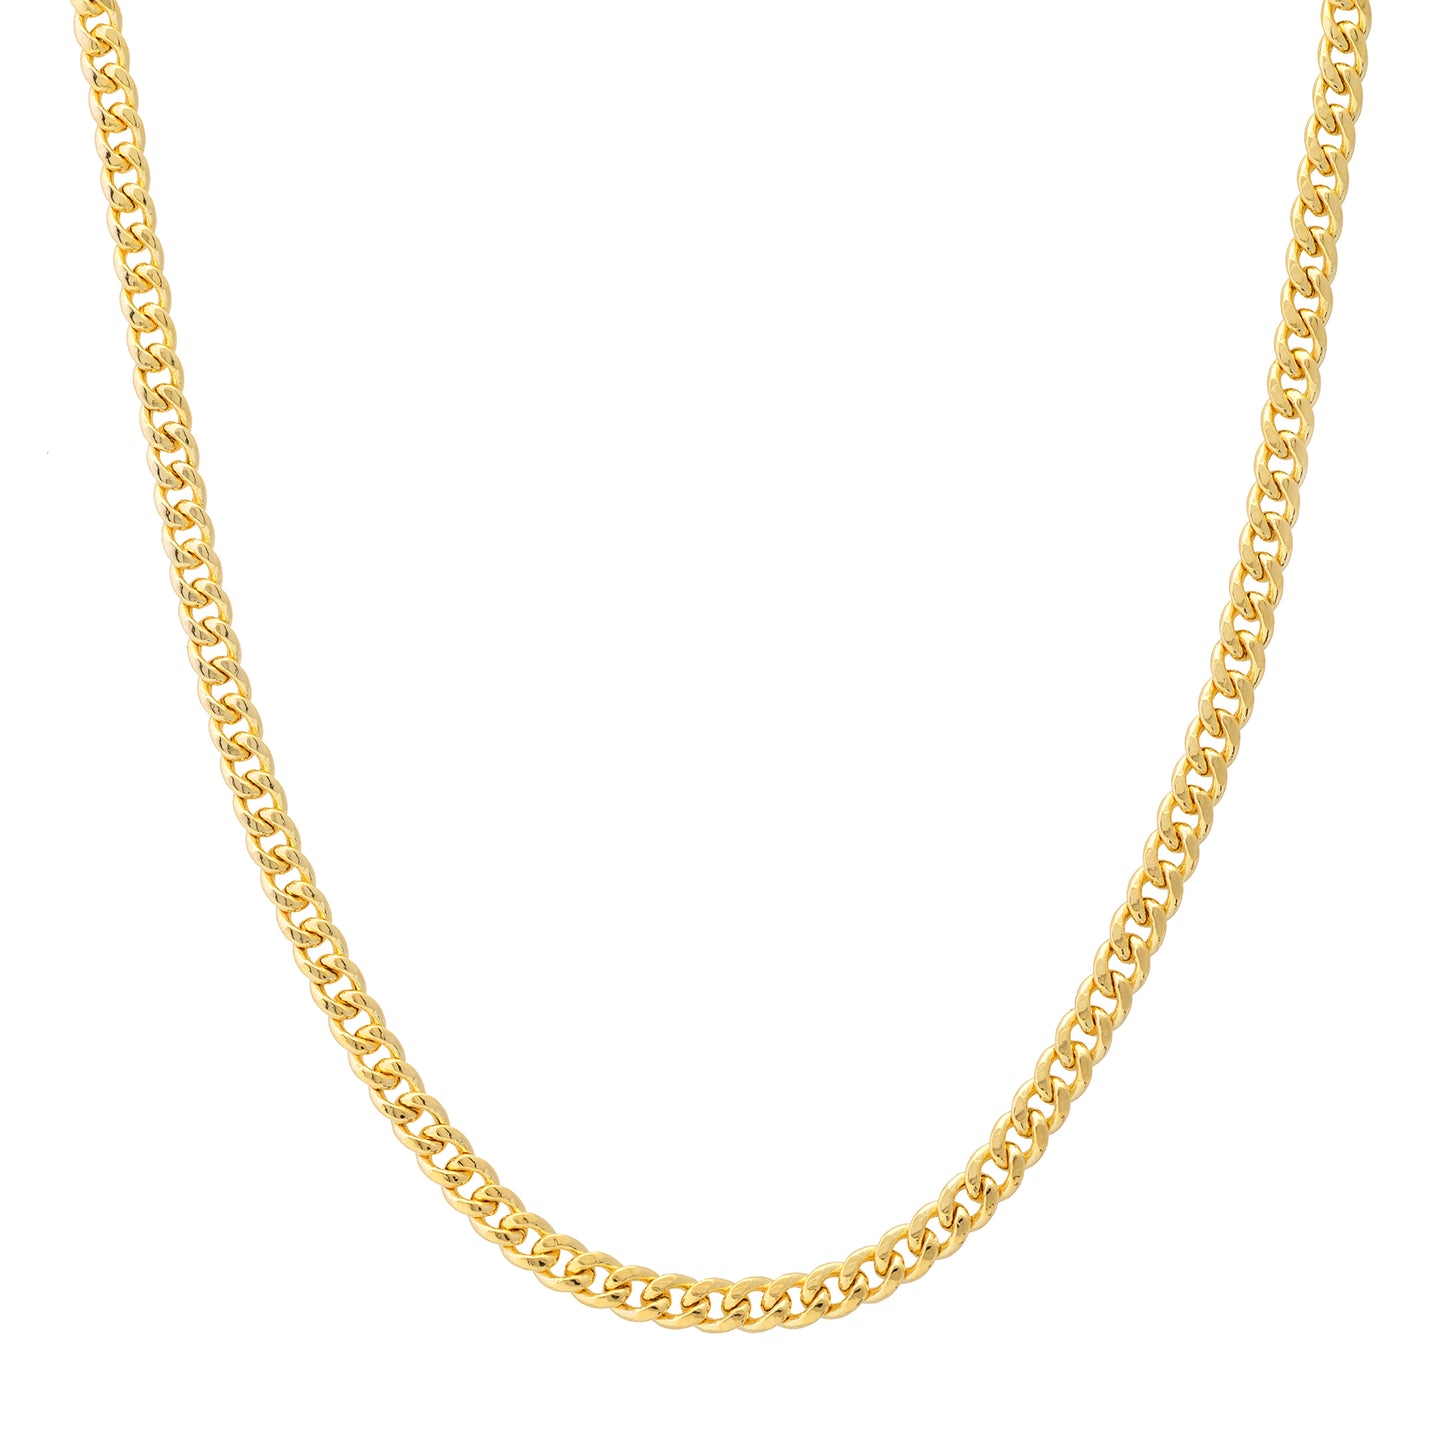 14k Gold Cuban Chain Link Light Miami Cuban Necklace, 22 and 24 Inch, 5.35mm Width